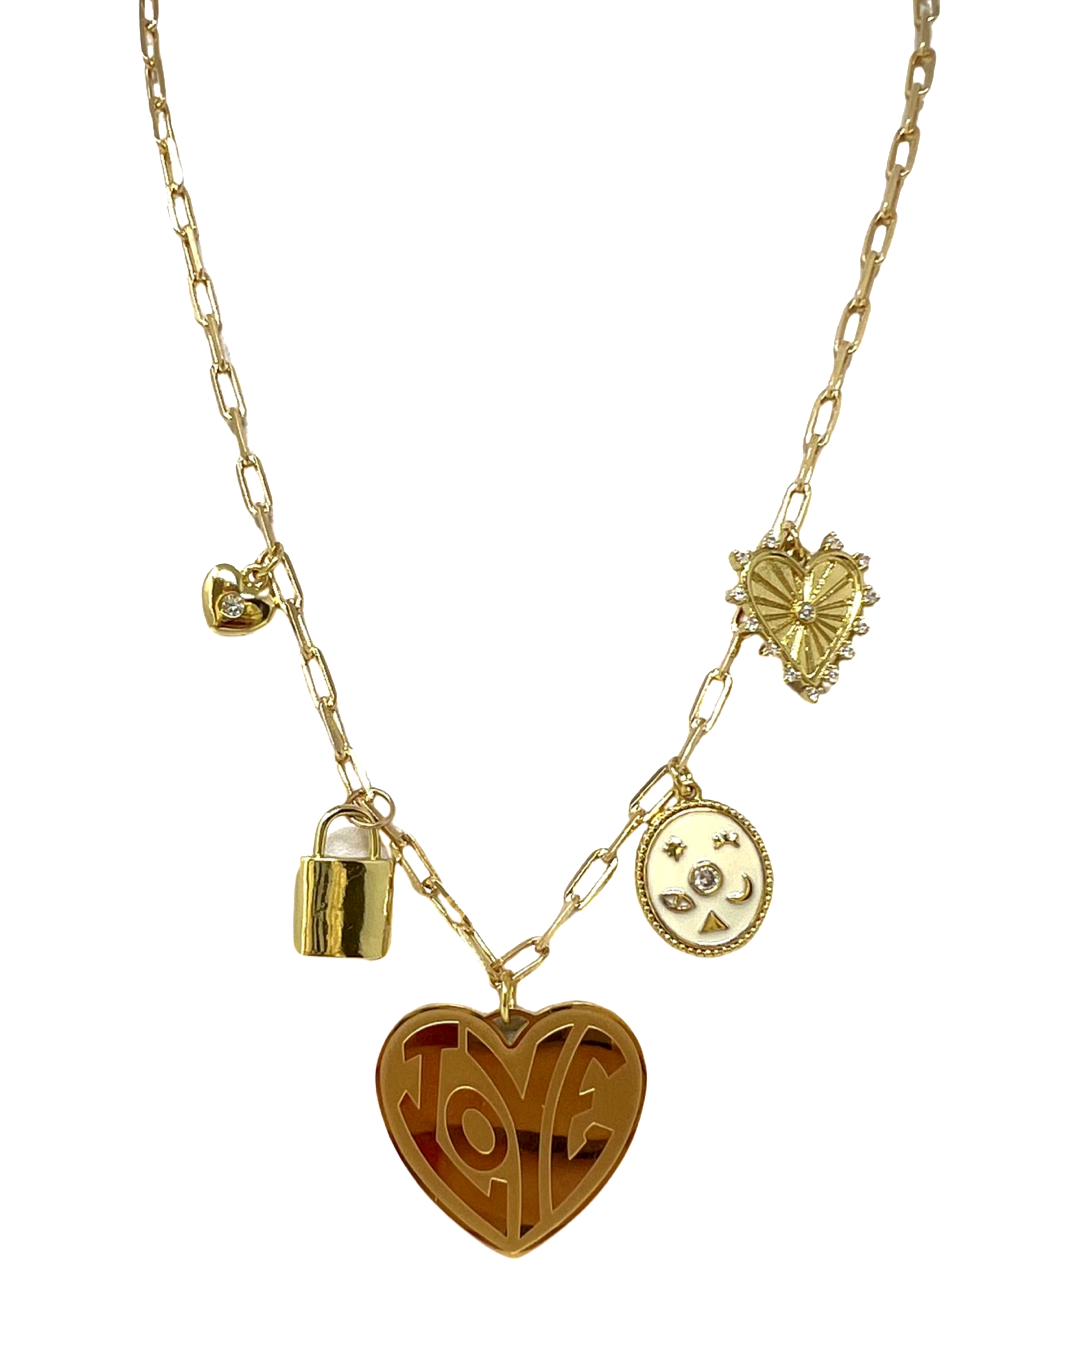 Whole Lotta Love Charm Necklace in Gold